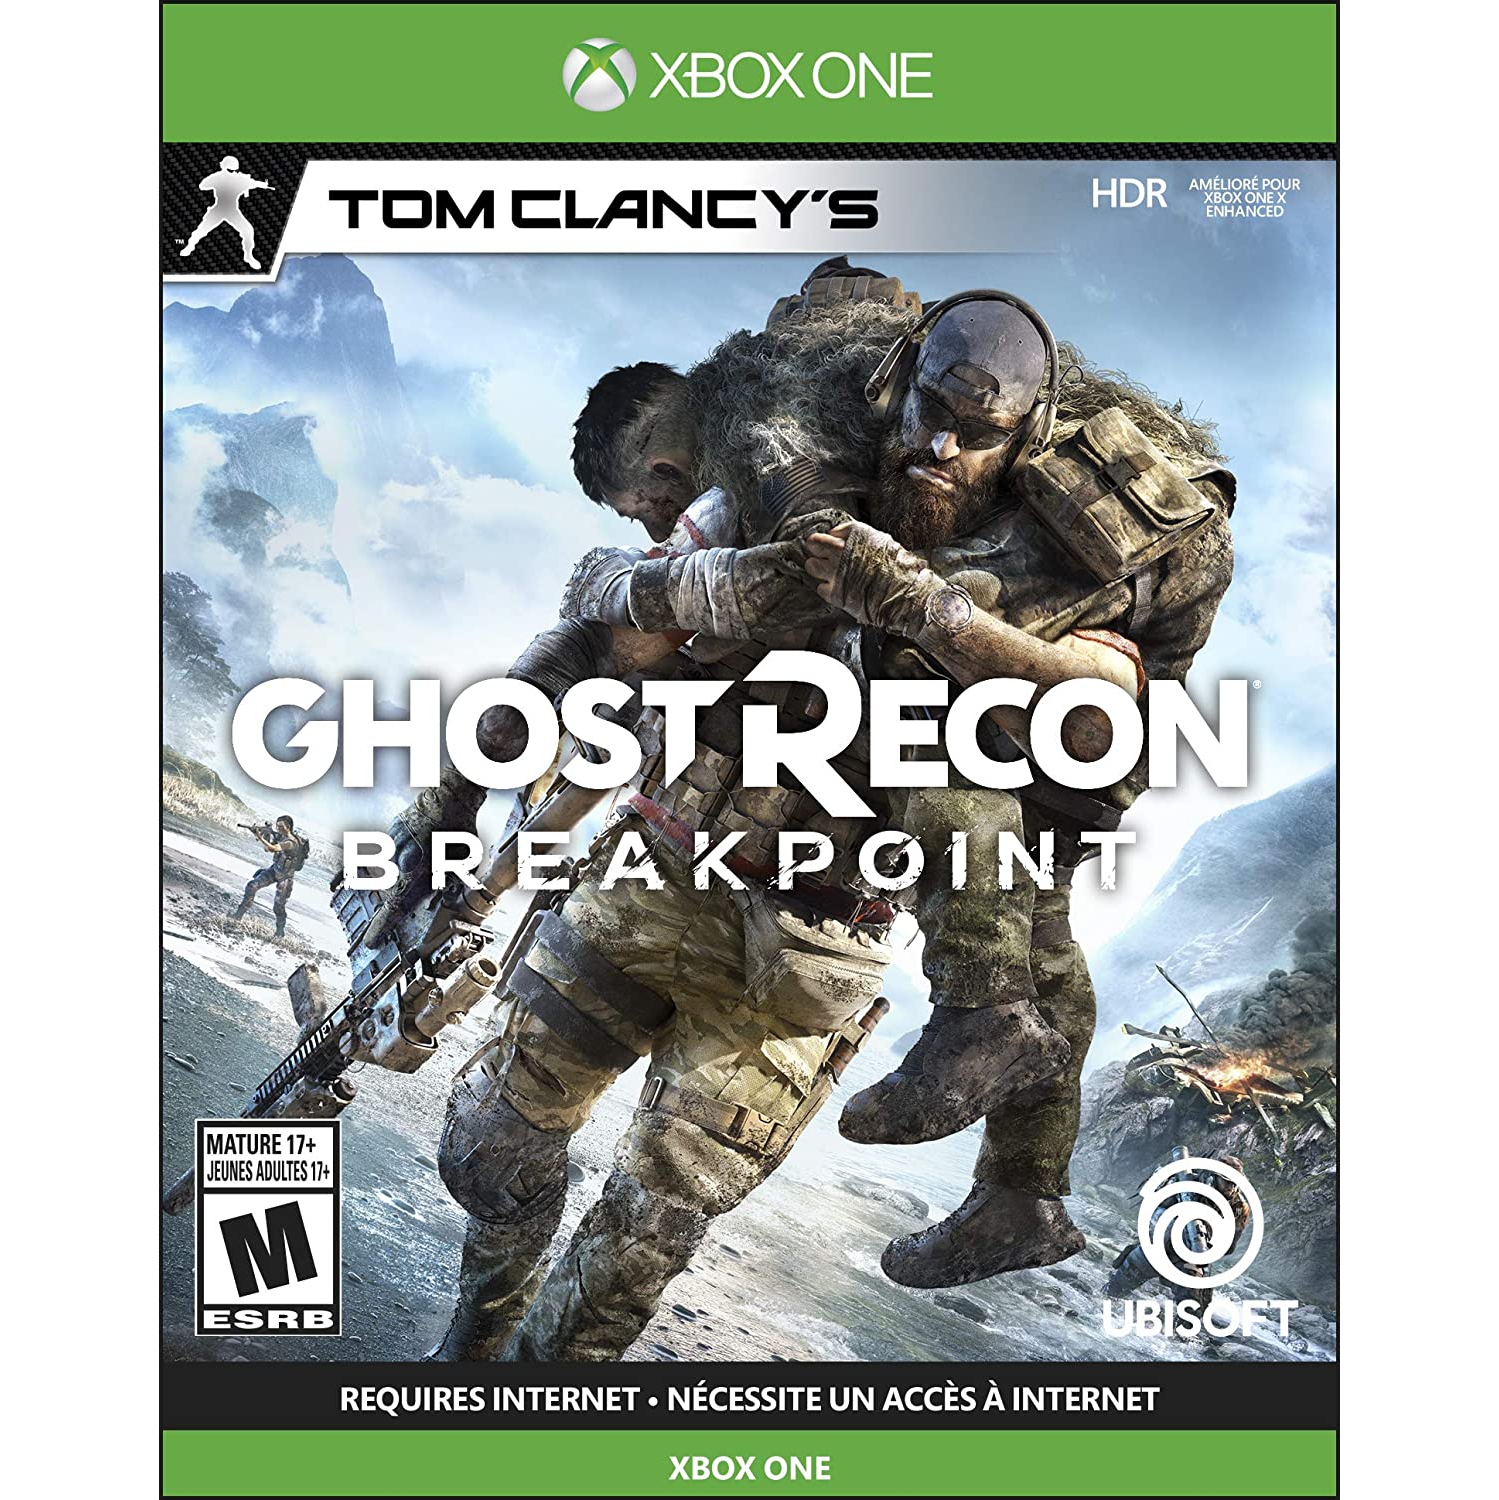 Tom Clancy’s Ghost Recon Breakpoint - Xbox One